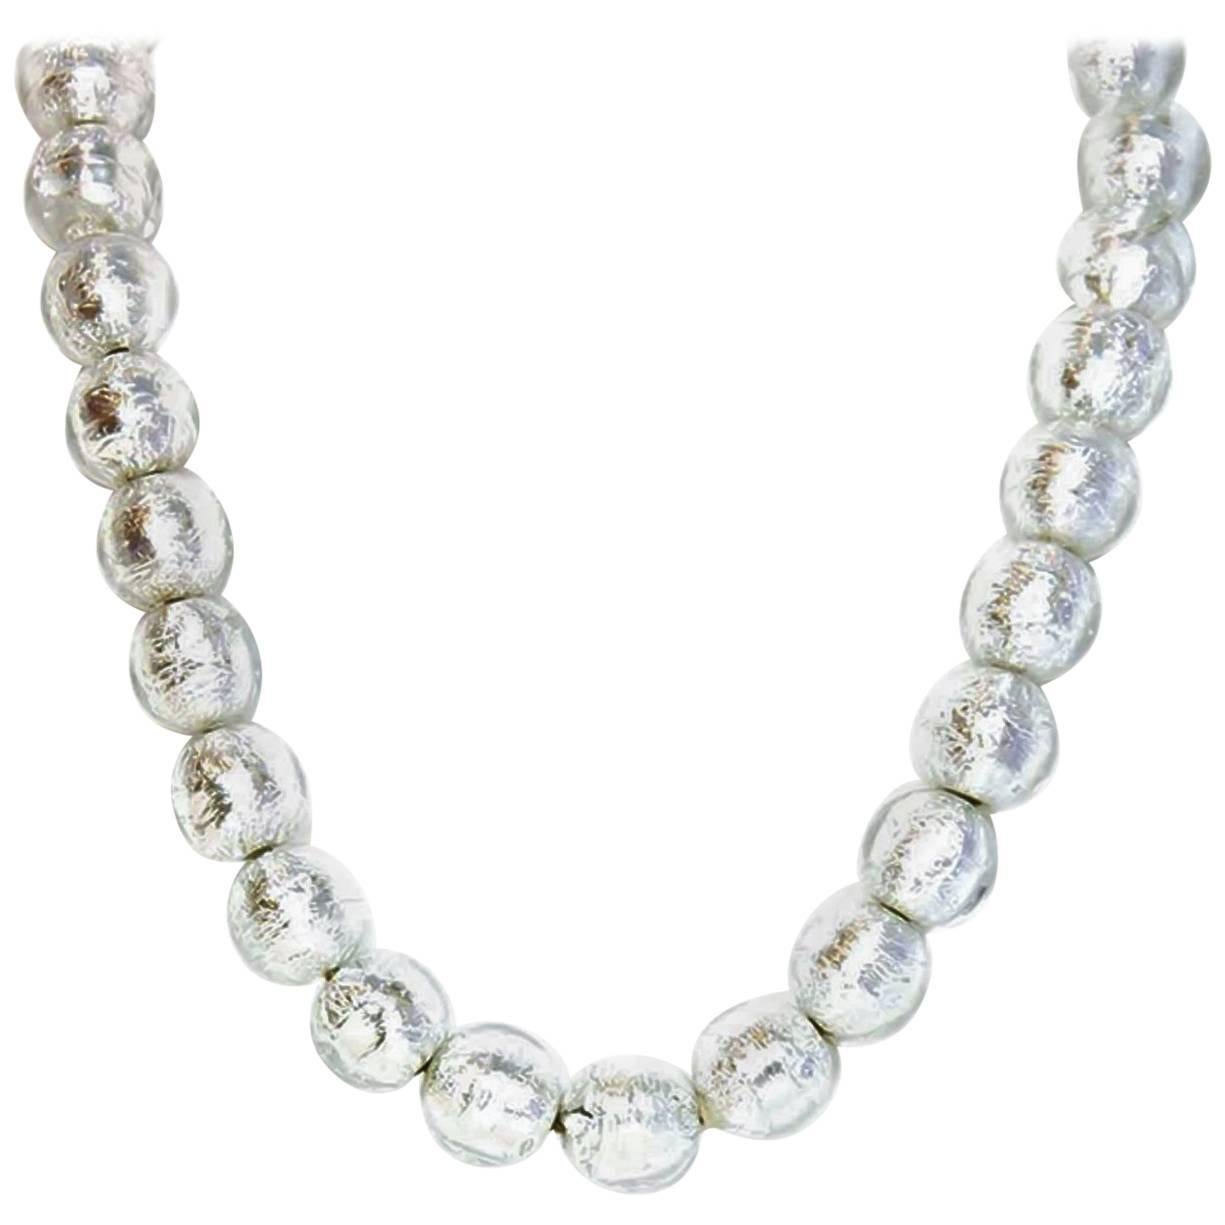 Chanel 2000 Clear Bead & Silver Foil Necklace